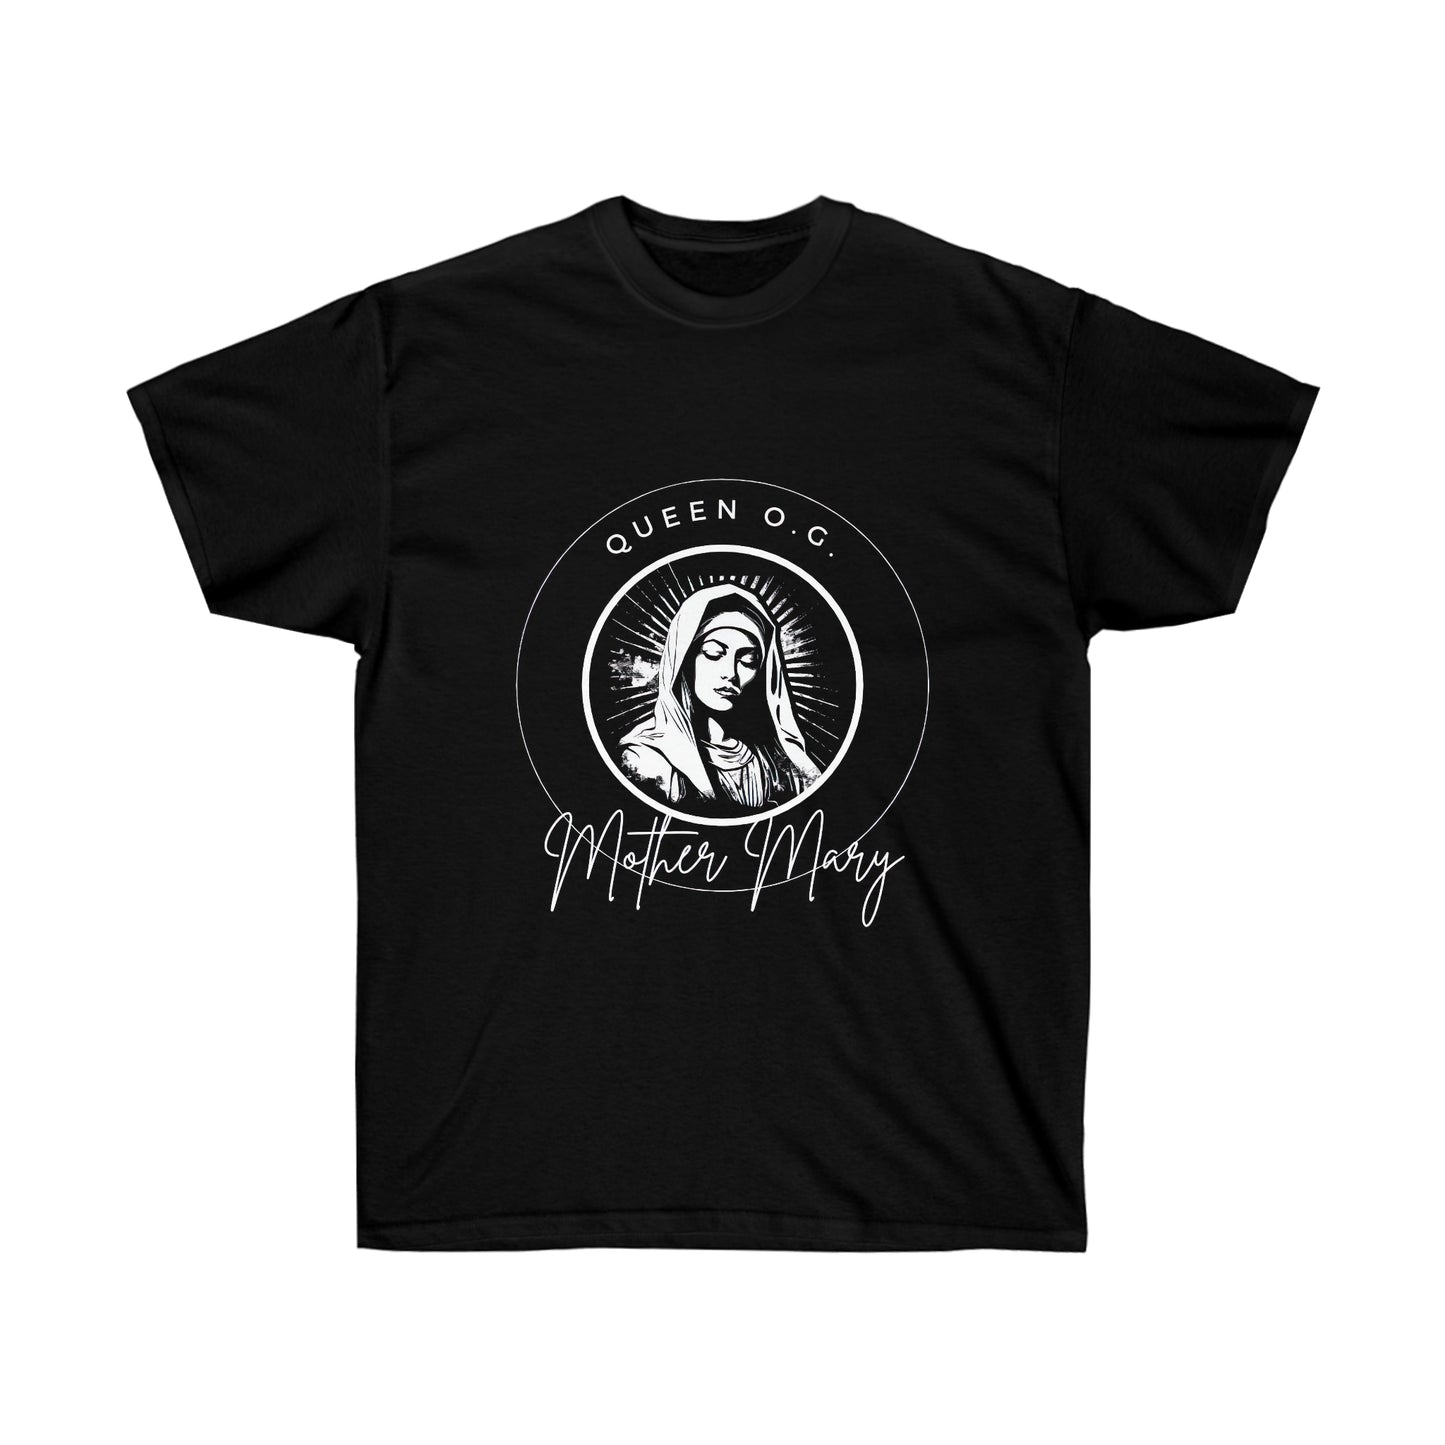 Mother Mary: The Queen O.G. - Ultra Cotton Tee - Women